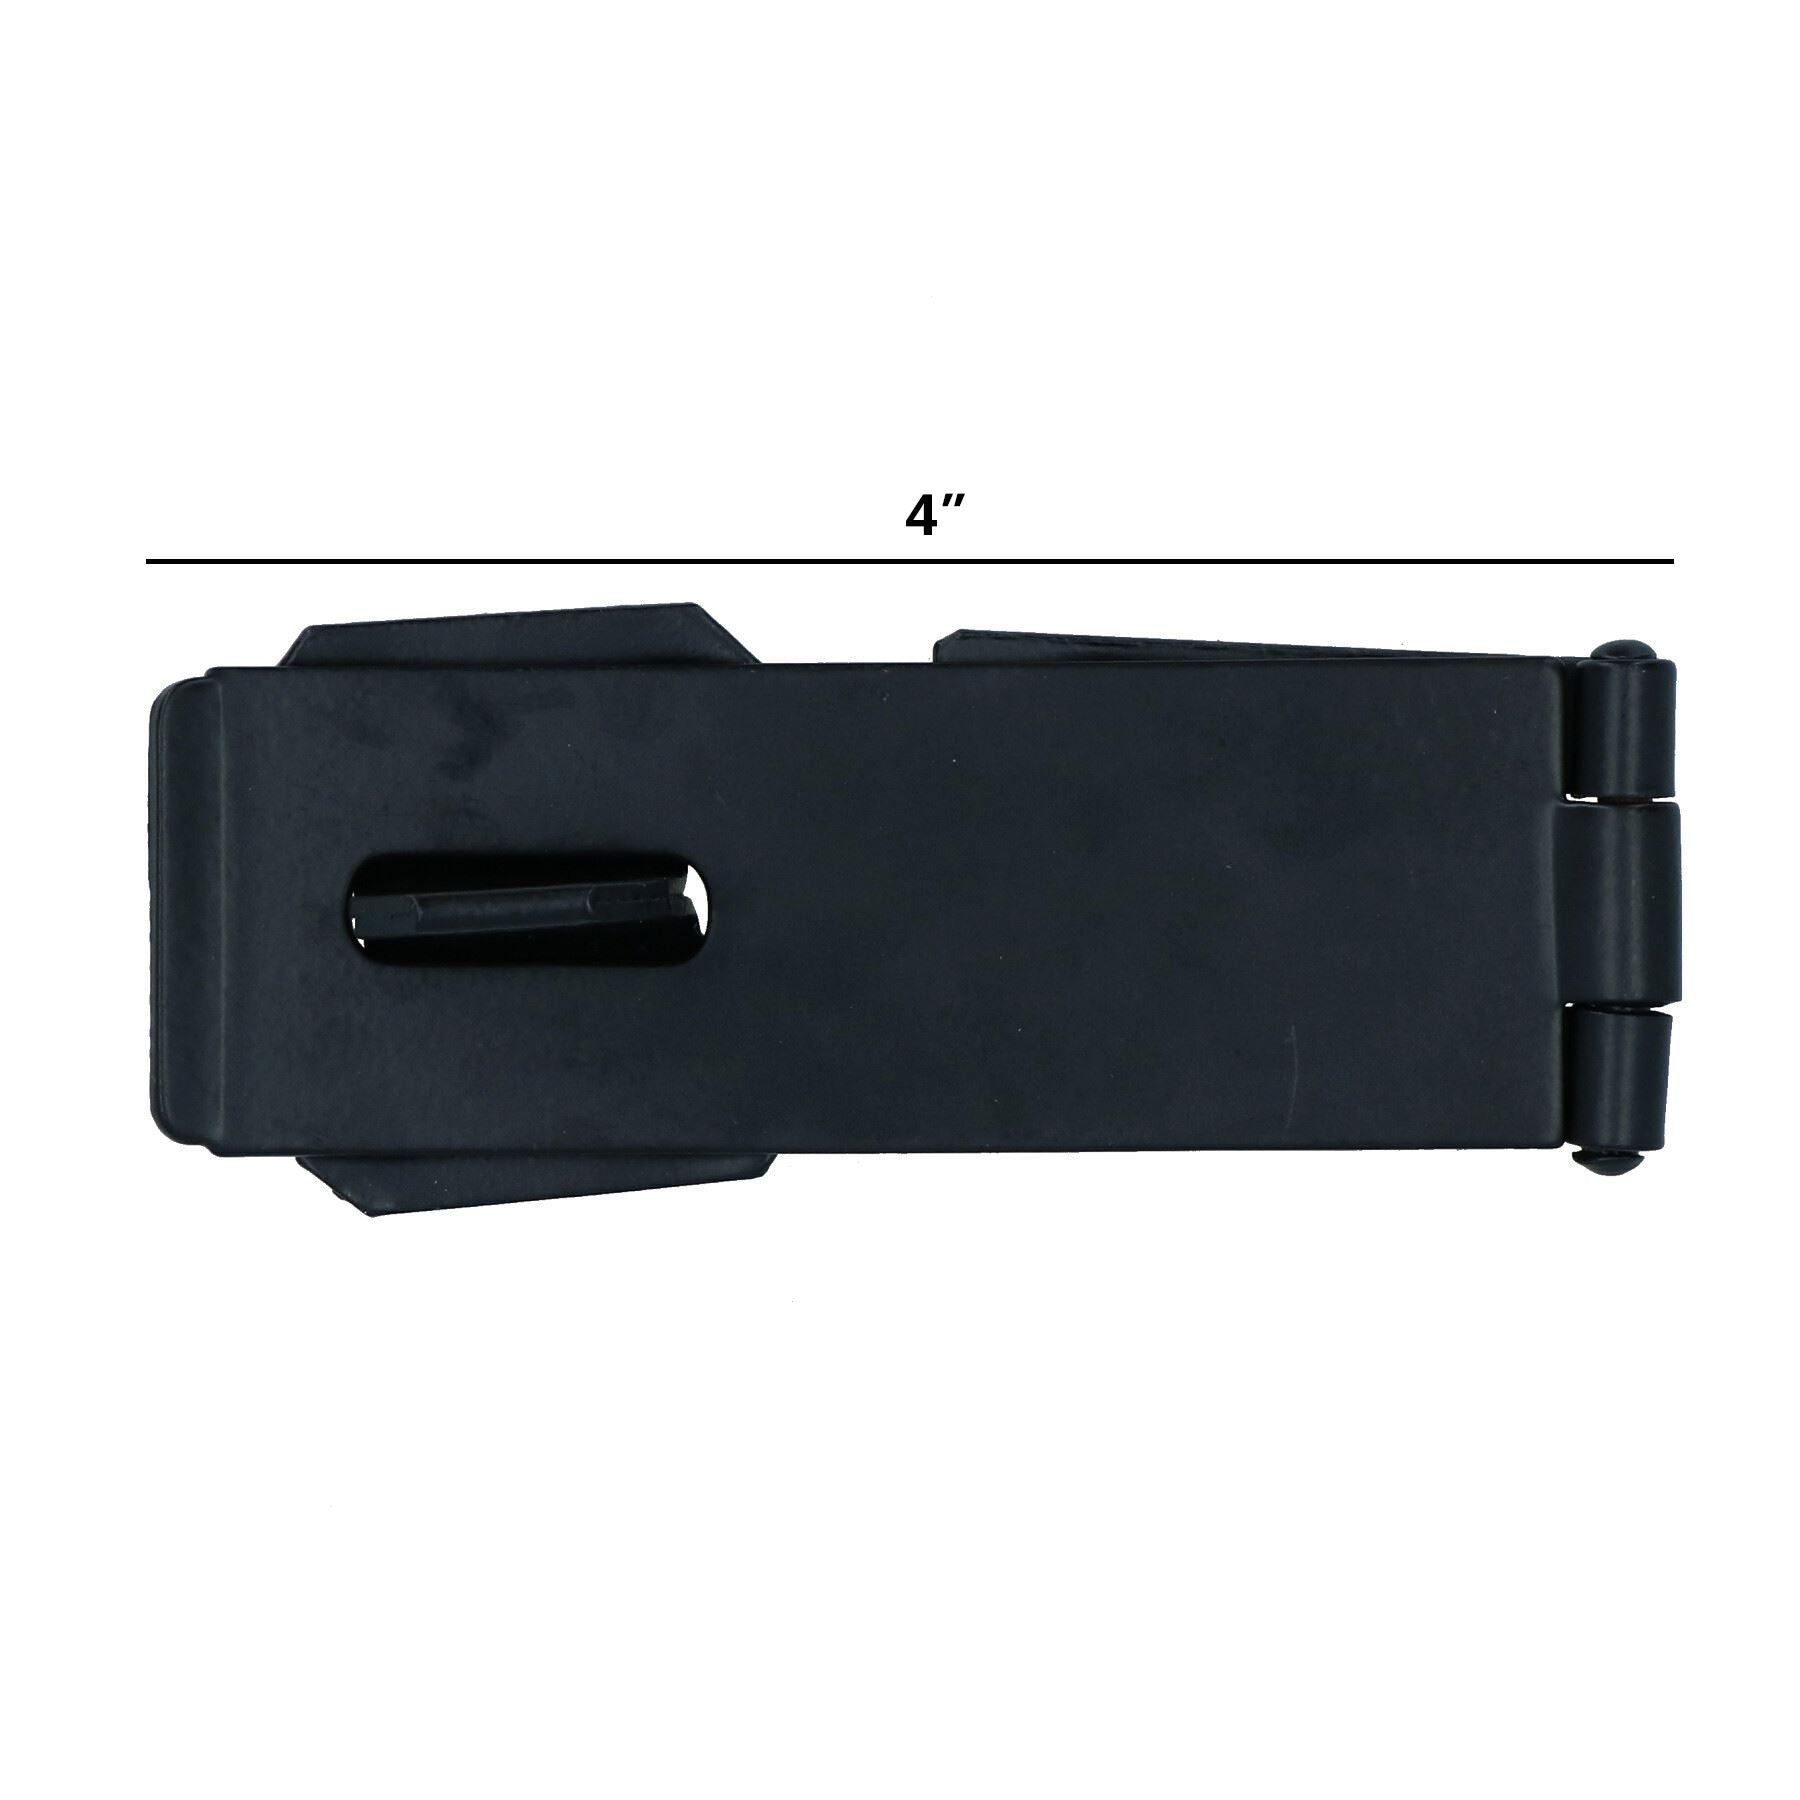 4” (100mm) heavy Duty Safety Hasp and Staple Security Lock for Gates Sheds Doors